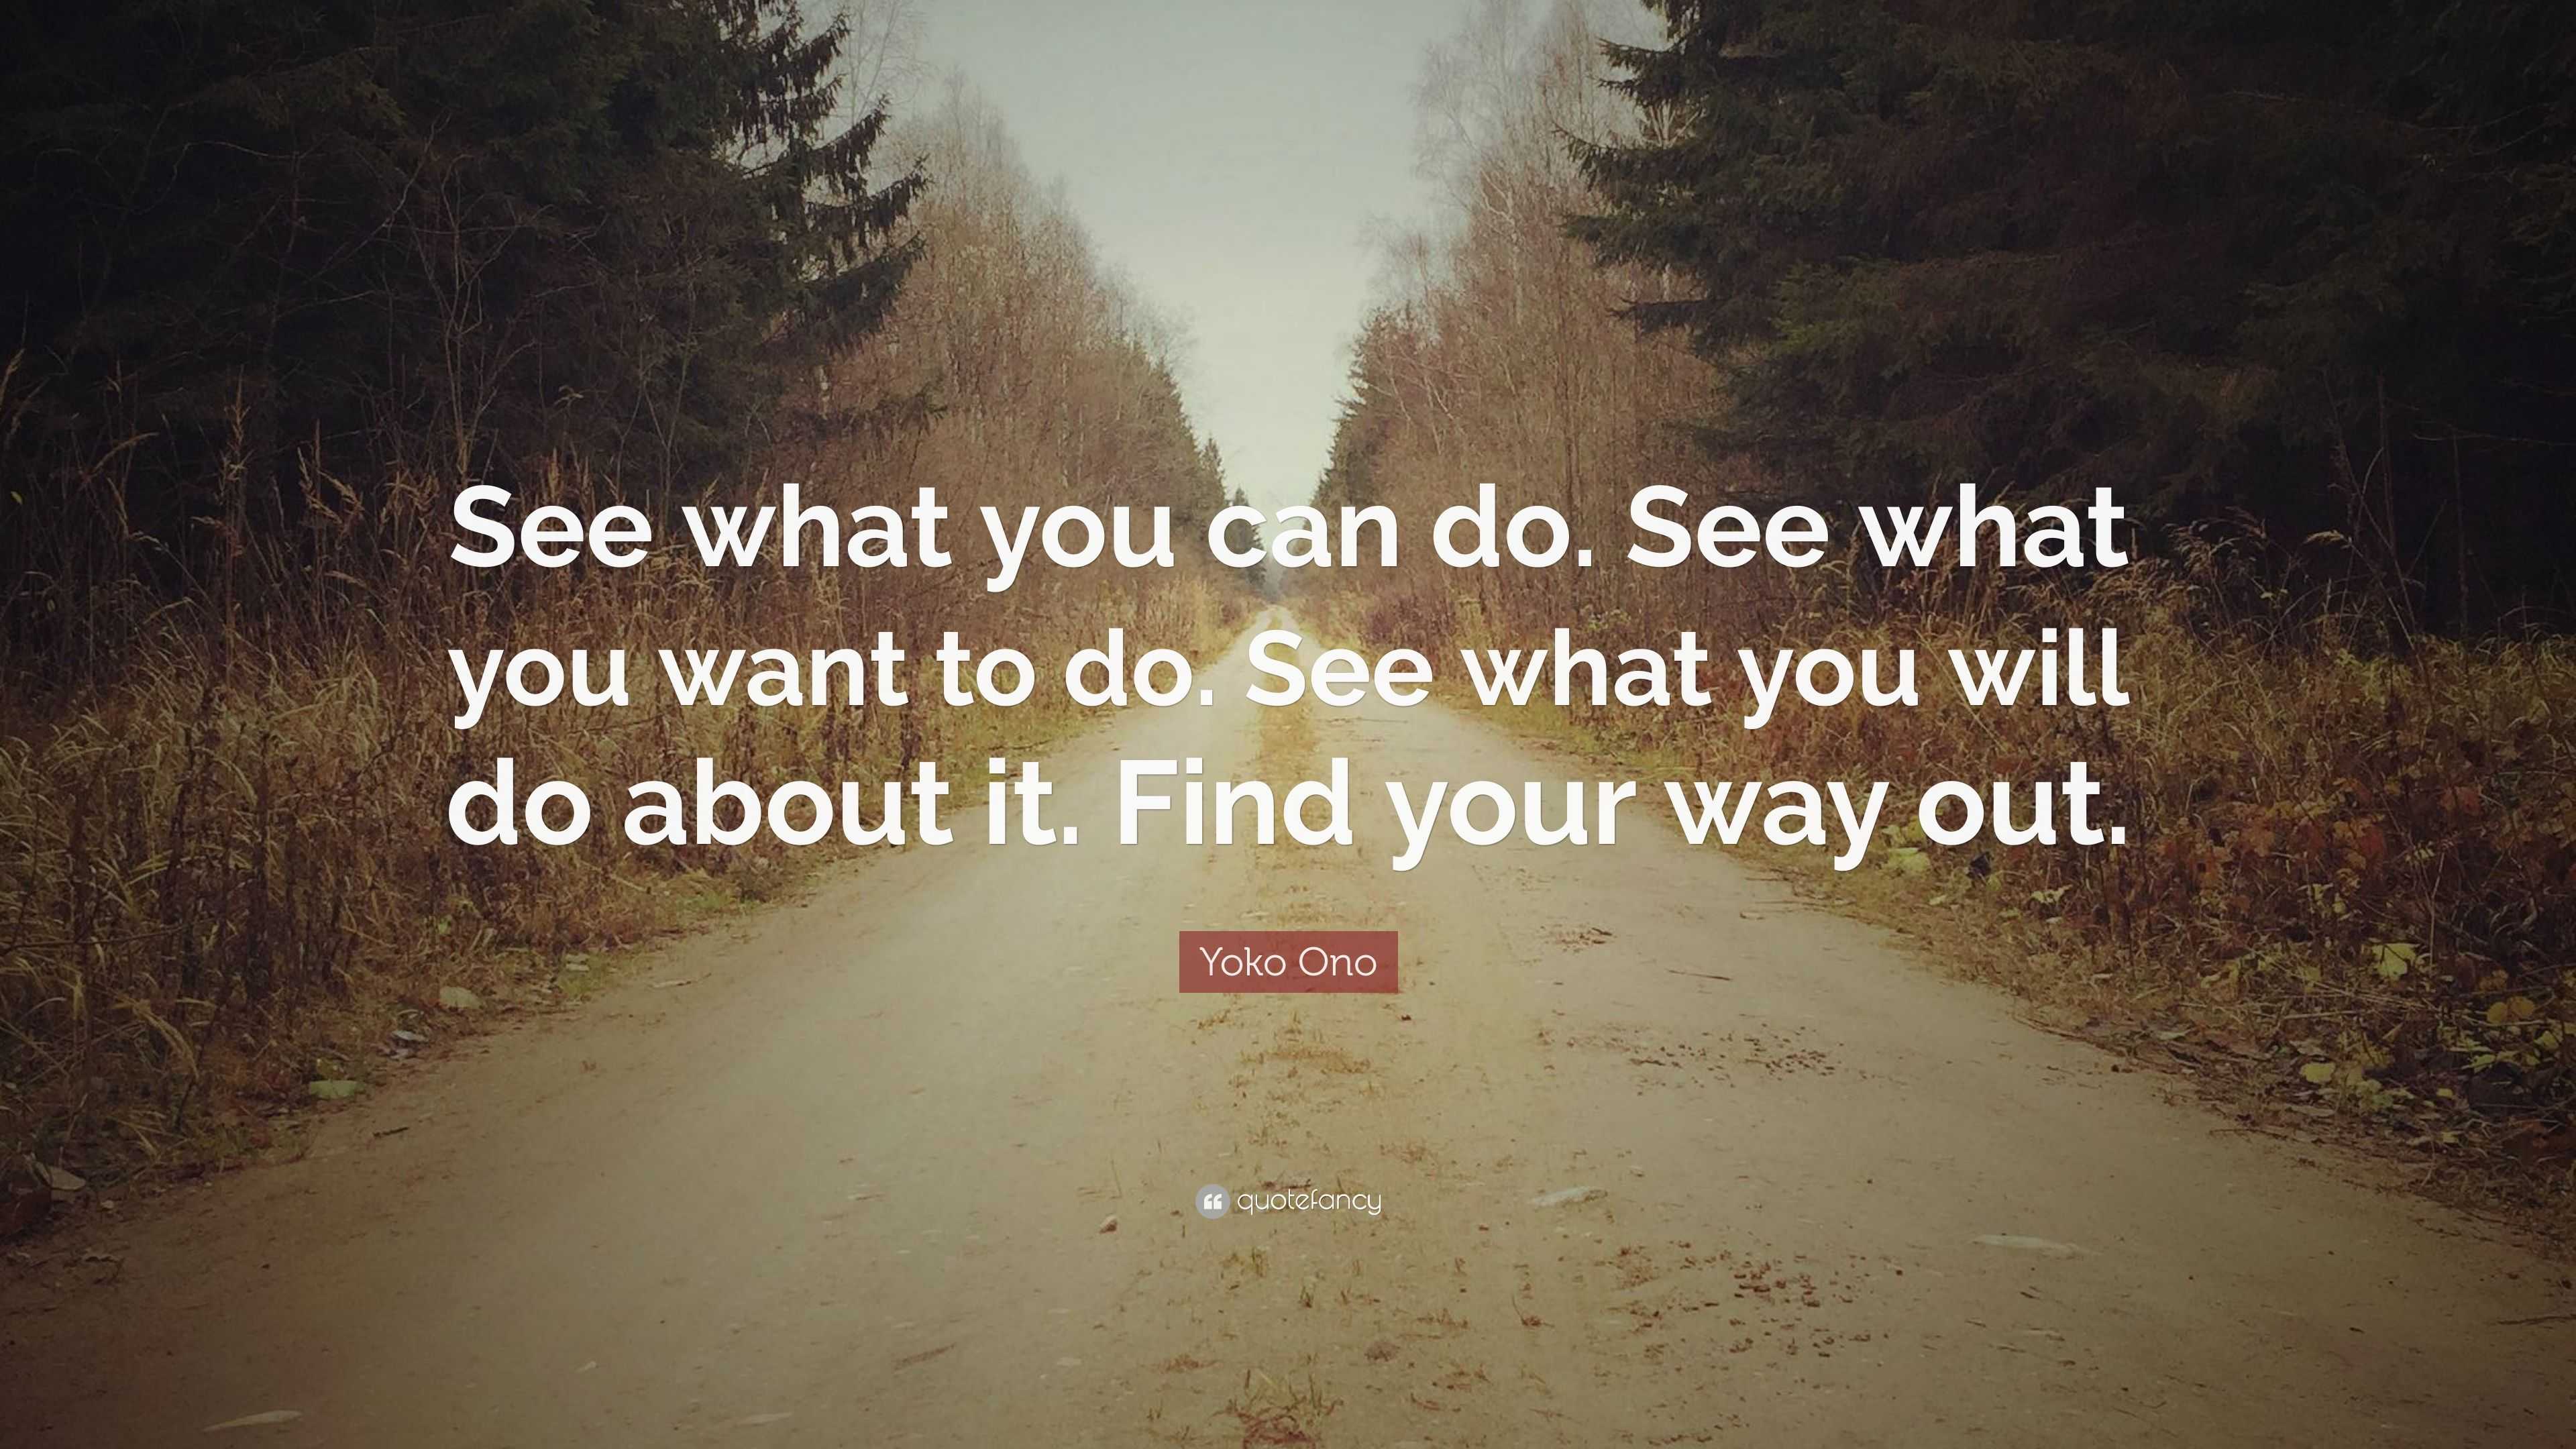 Yoko Ono Quote “see What You Can Do See What You Want To Do See What